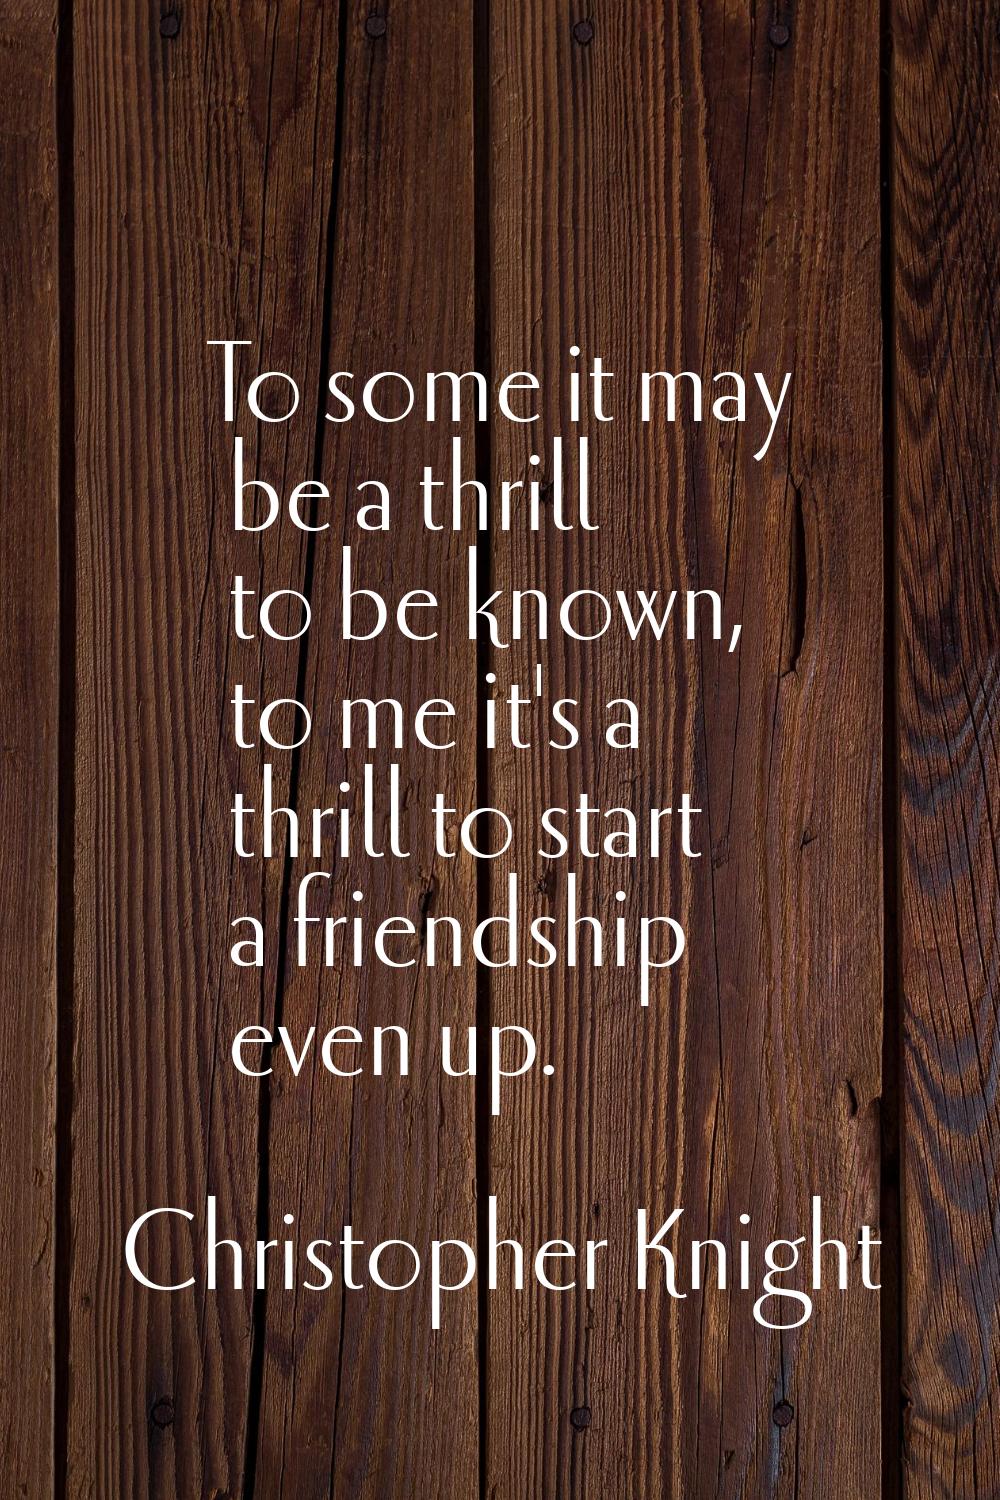 To some it may be a thrill to be known, to me it's a thrill to start a friendship even up.